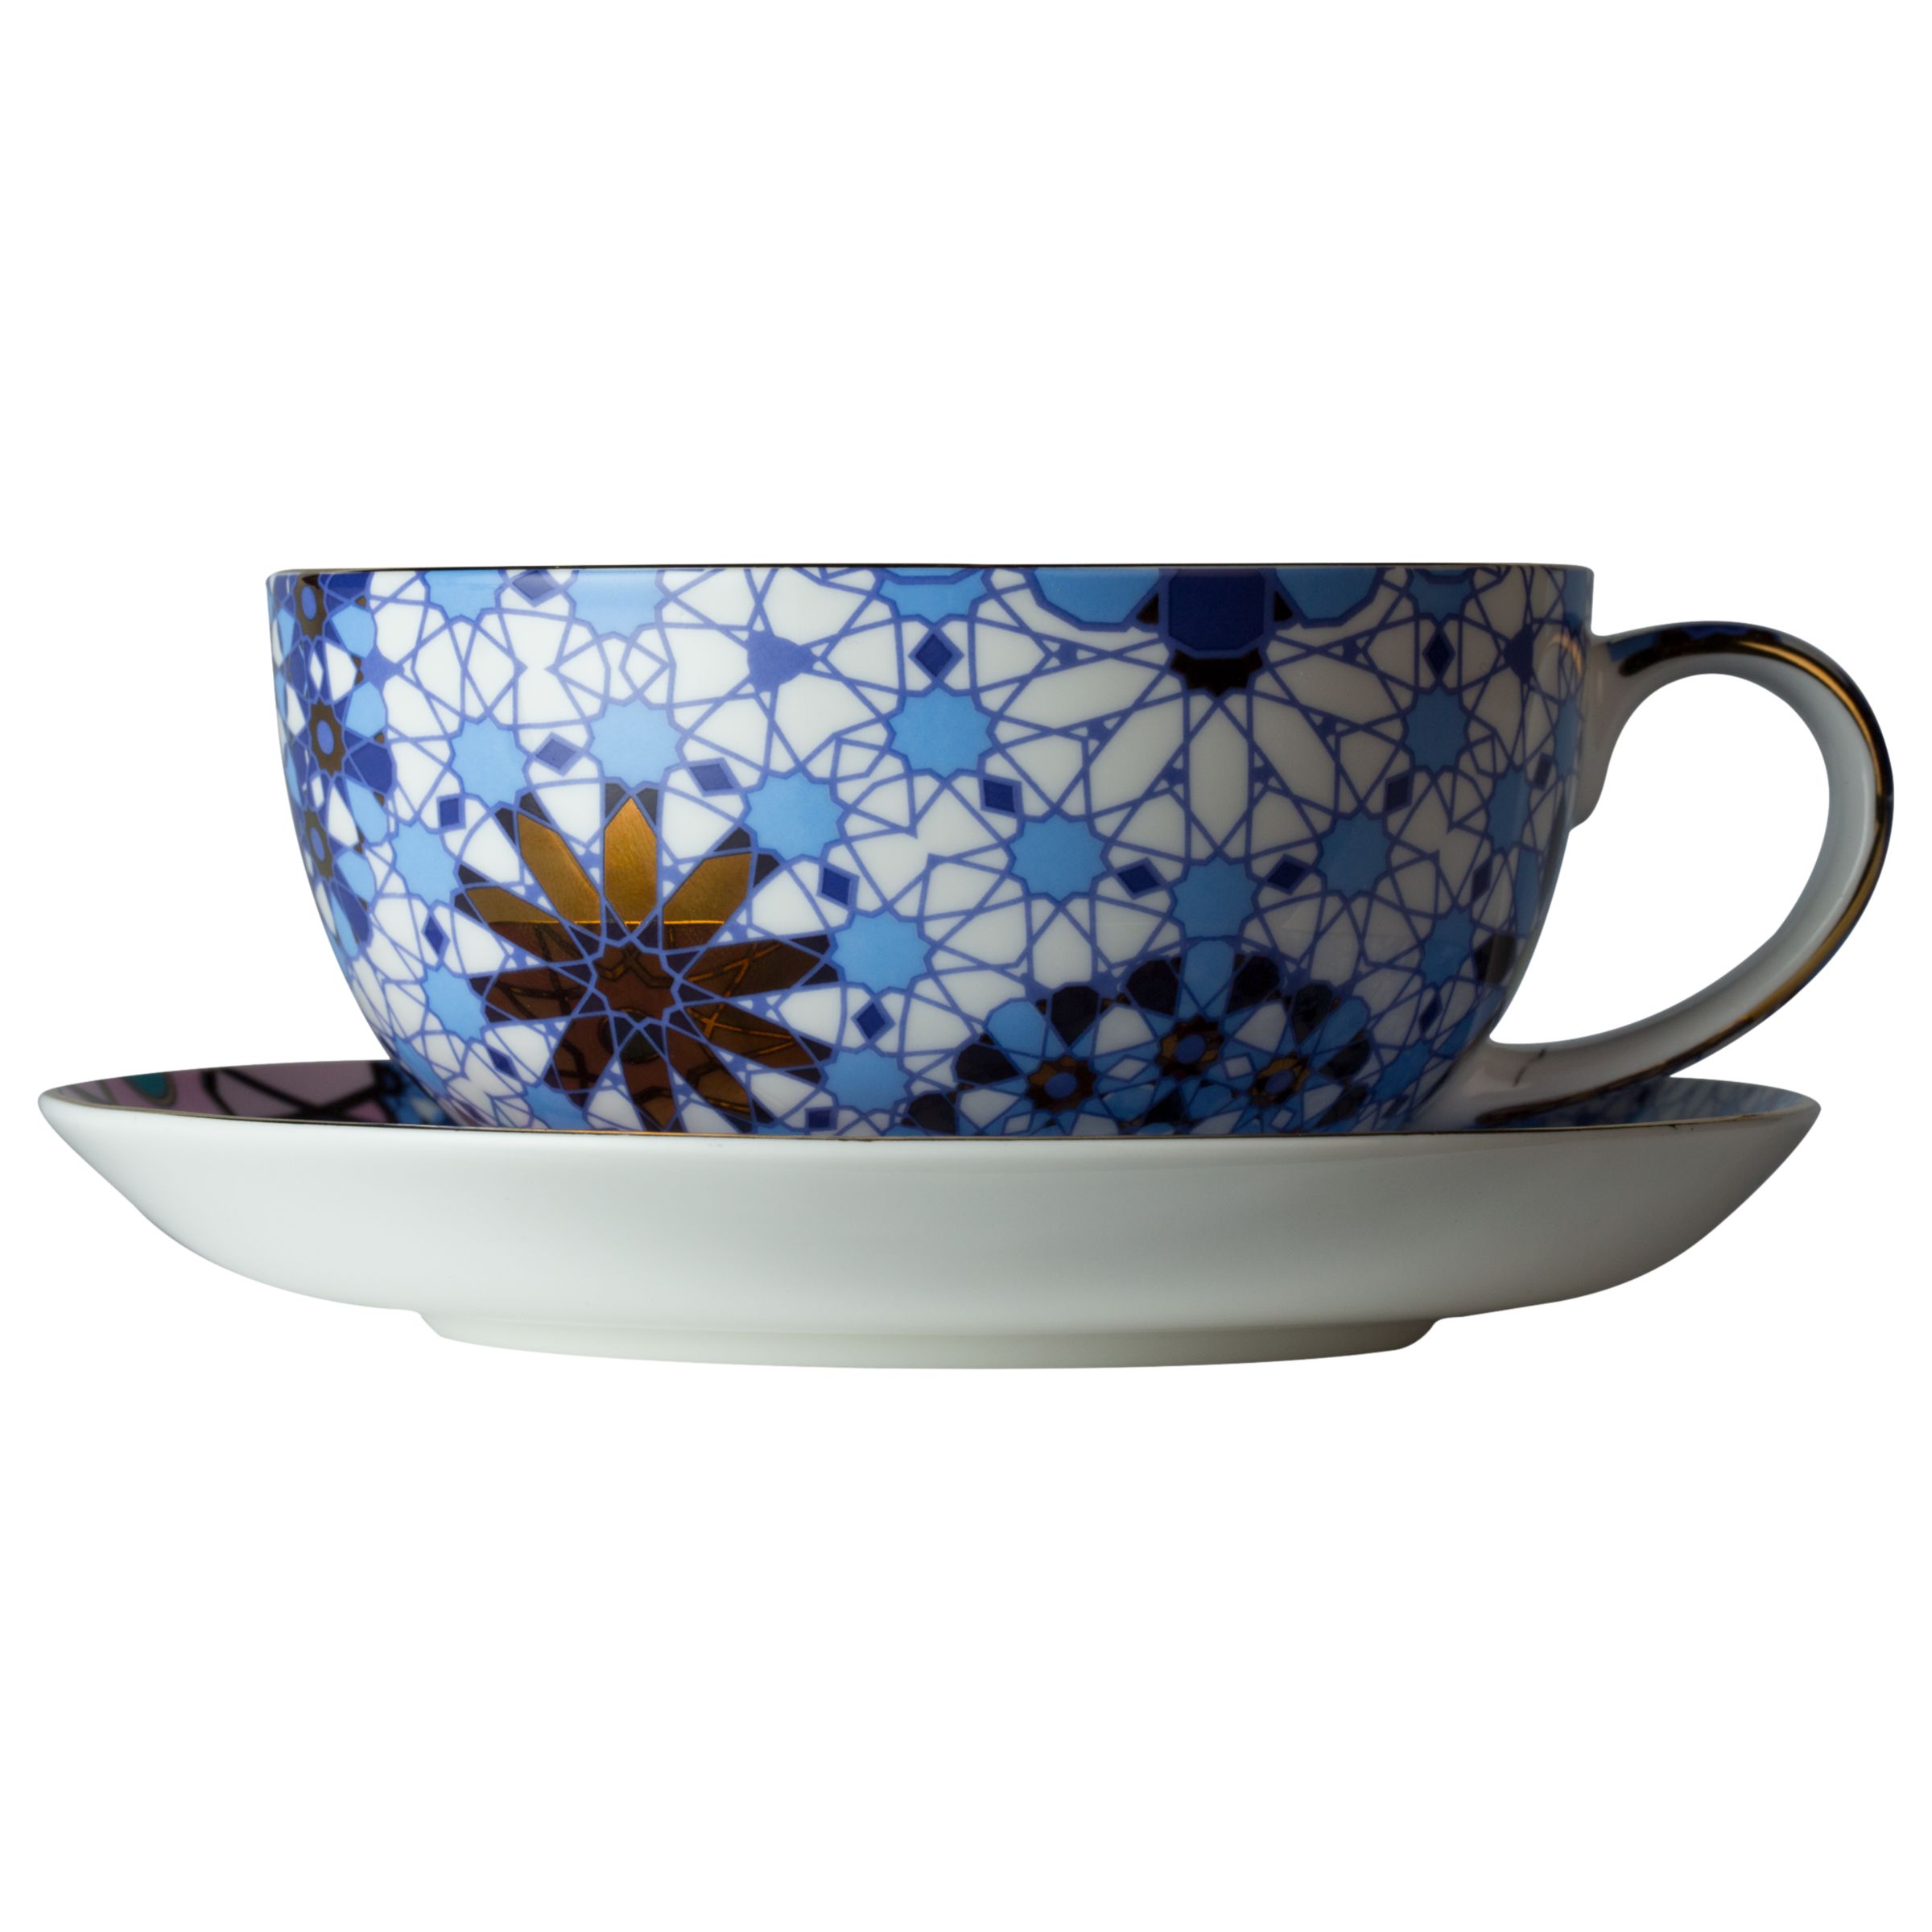 T2 Dazed and Dazzled Cup and Saucer, Blue/Multi, 250ml